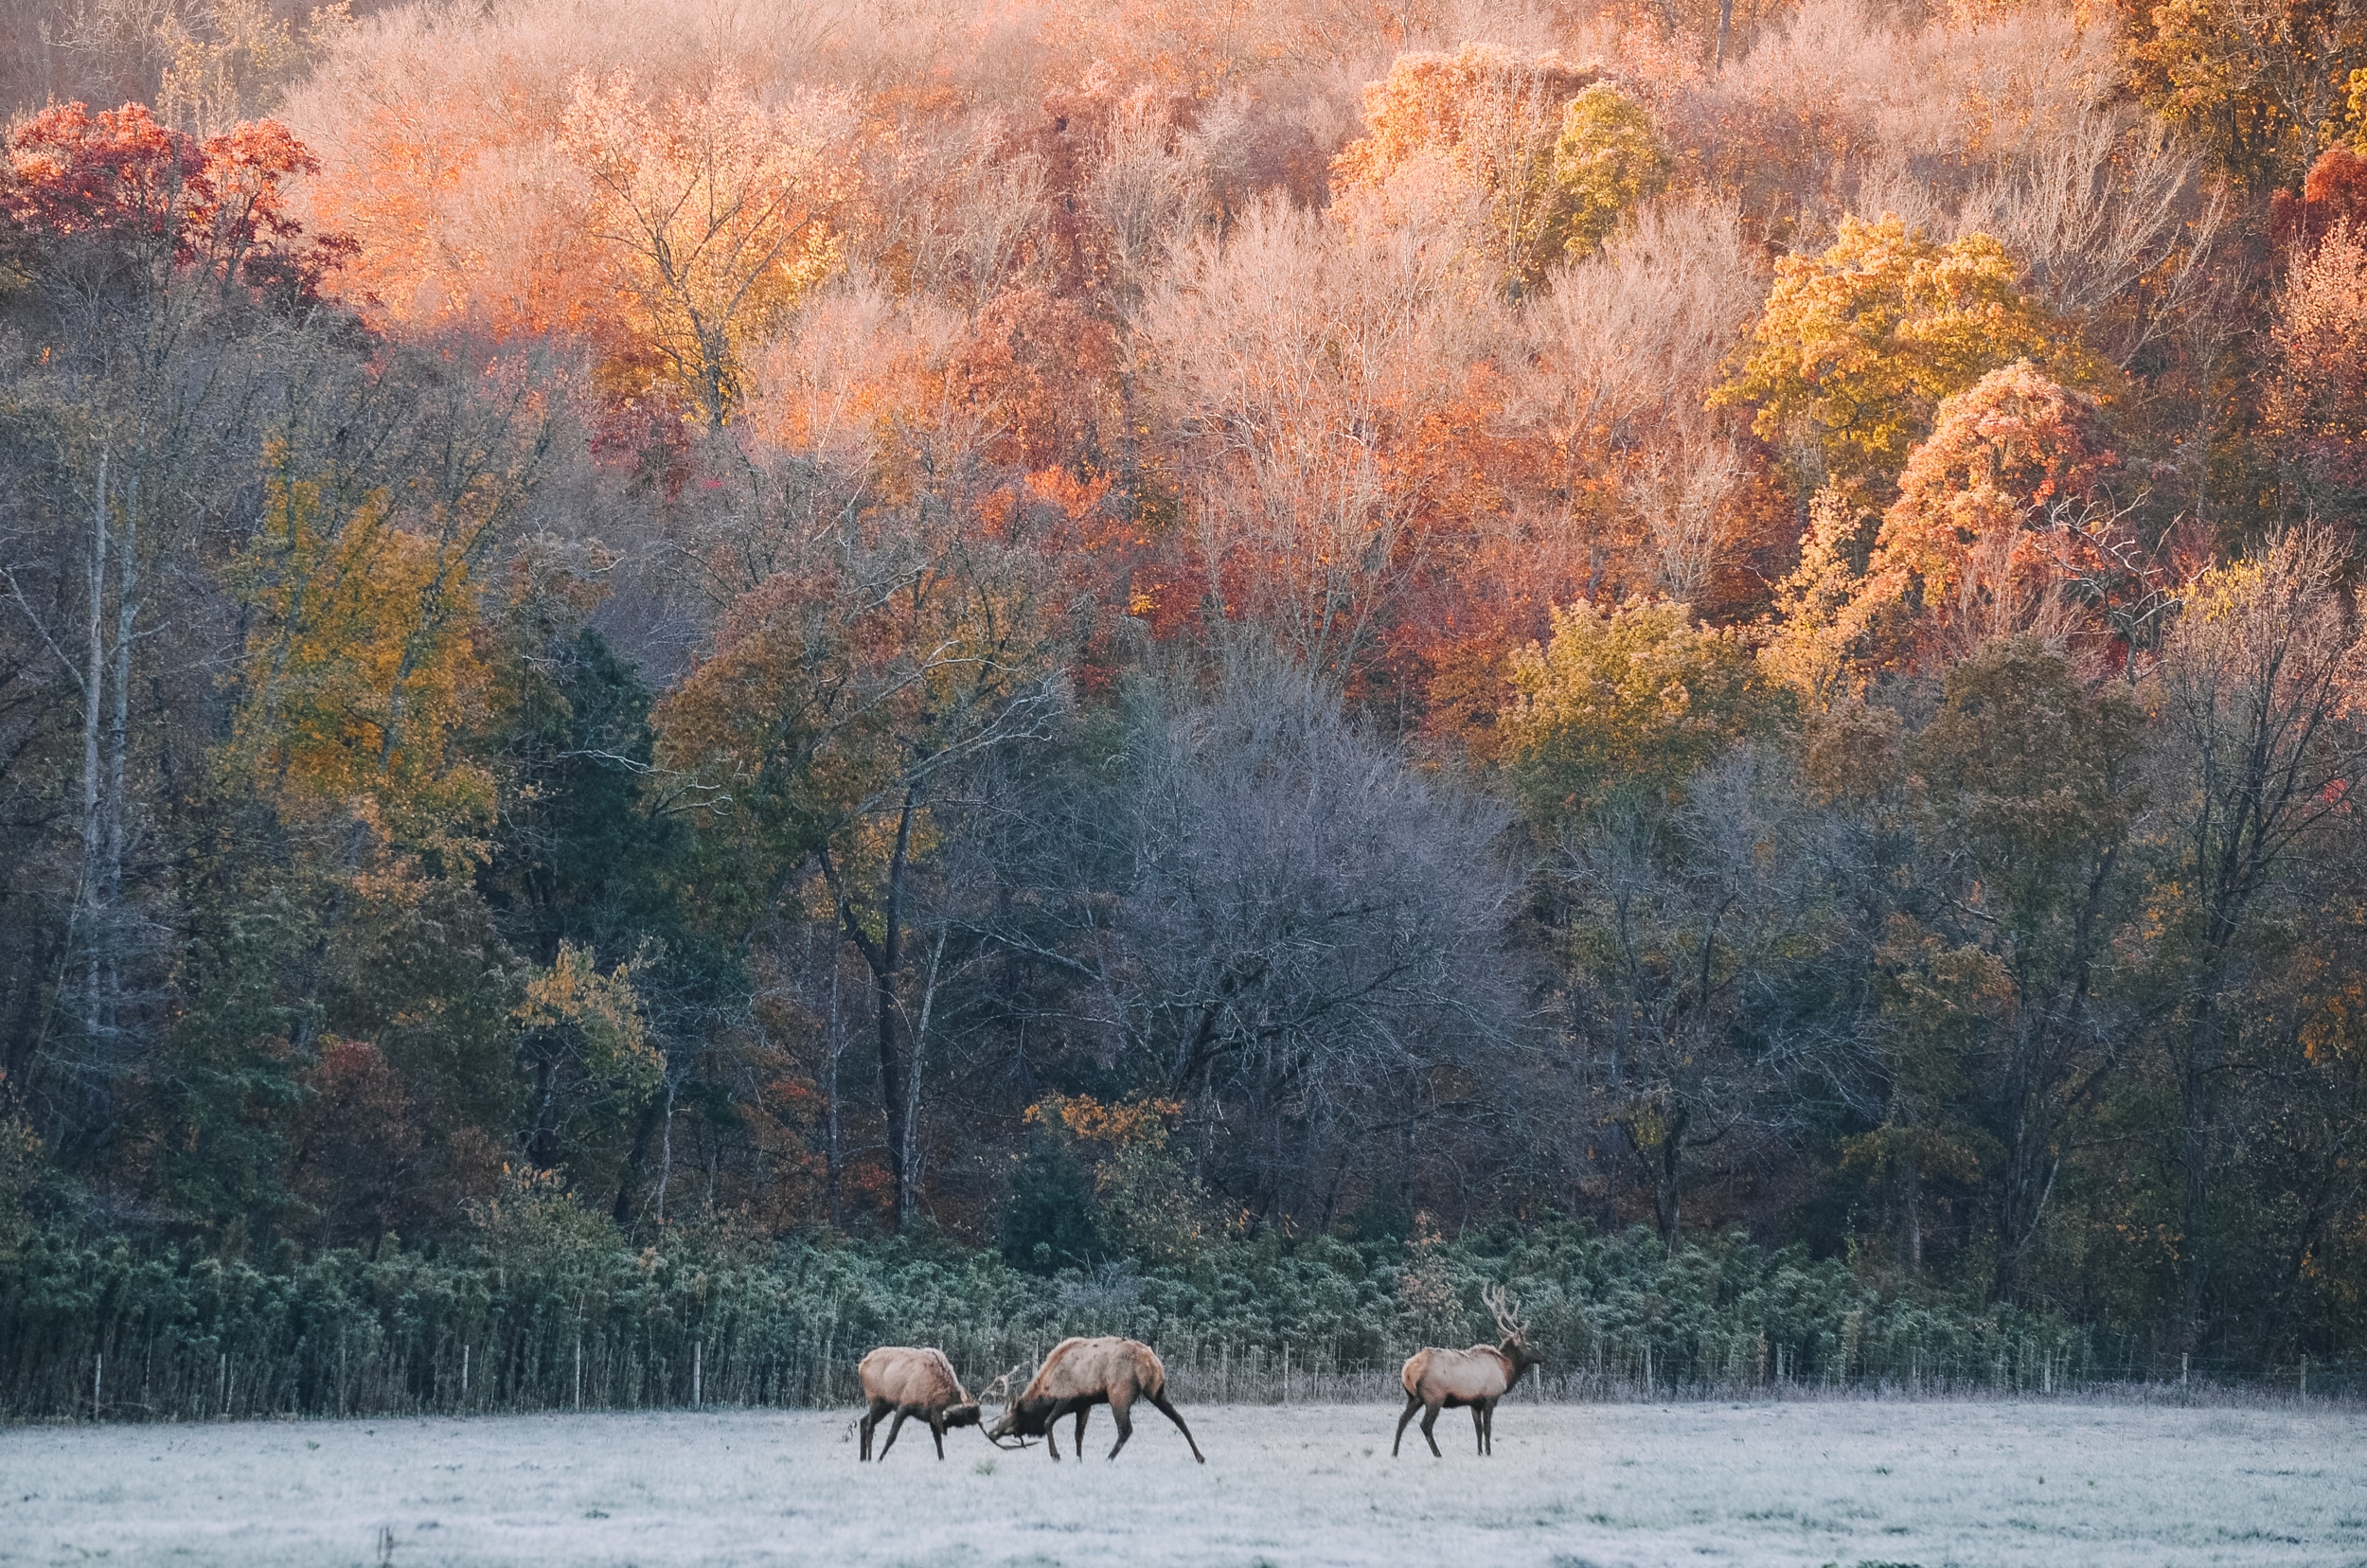 Elk in the Buffalo National River wilderness in the fall